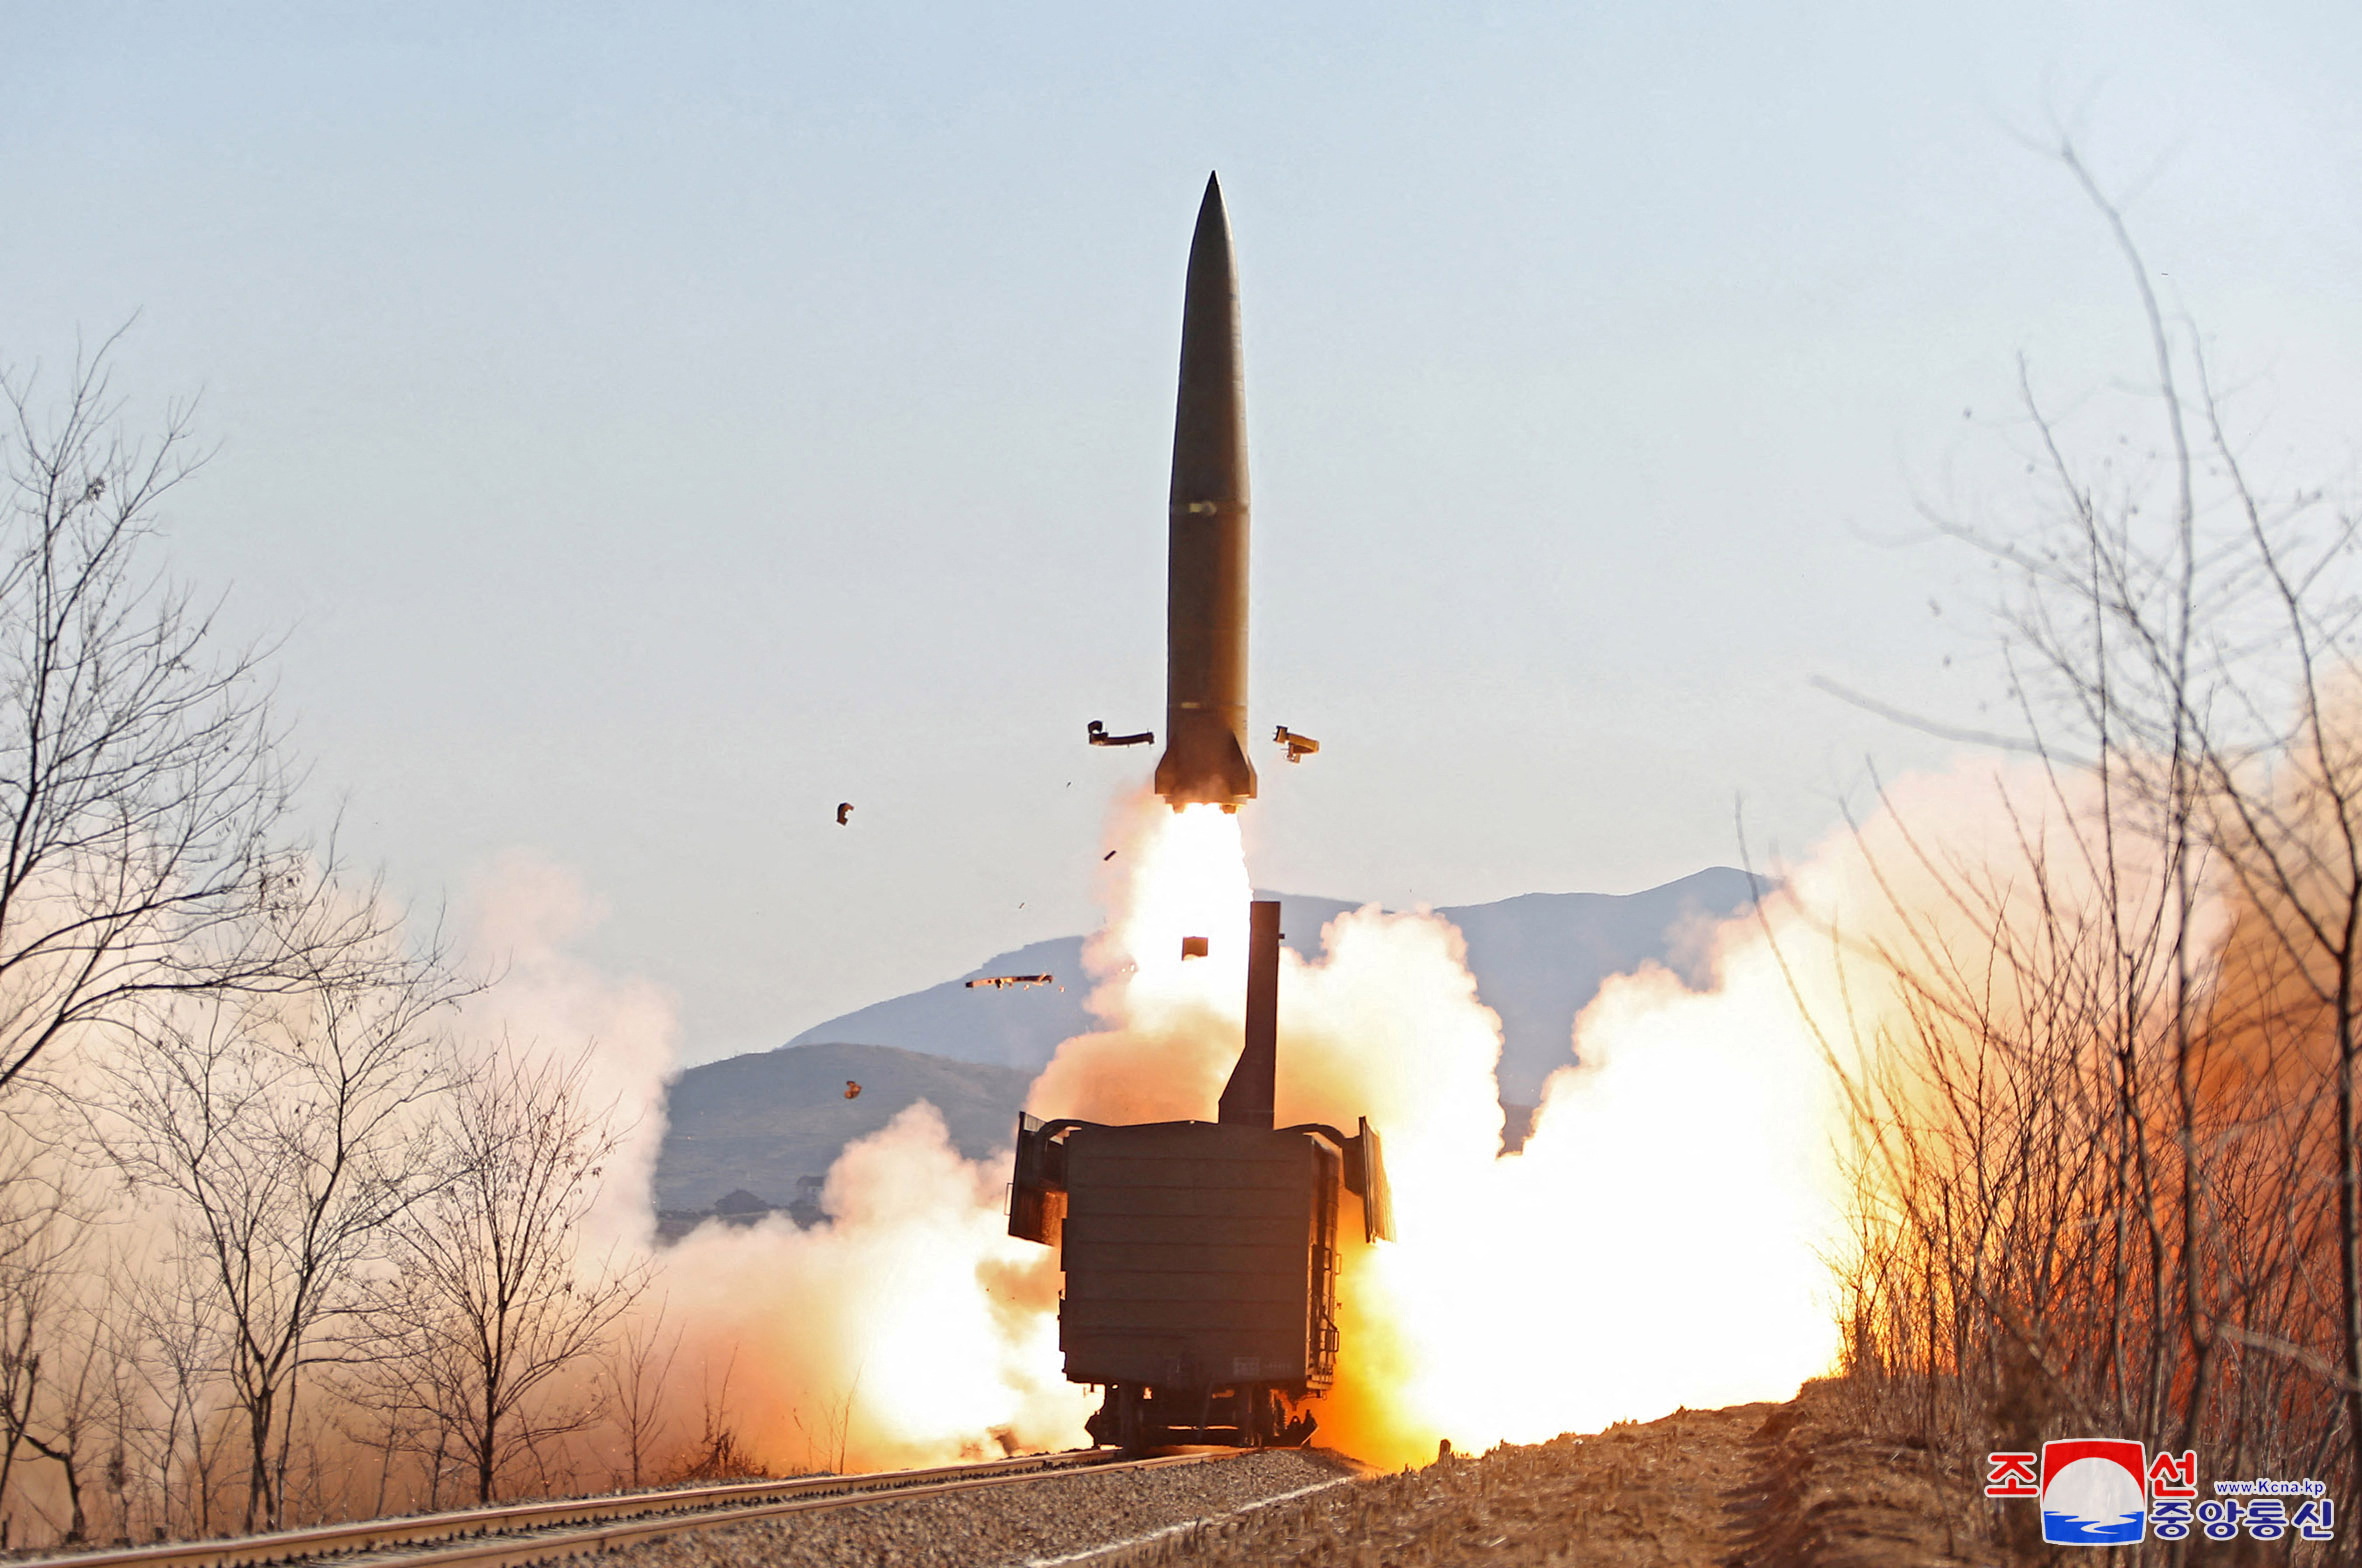 A railway-born missile is launched during firing drills according to state media, at an undisclosed location in North Korea, in this photo released January 14, 2022 by North Korea's Korean Central News Agency (KCNA).   KCNA via REUTERS    ATTENTION EDITORS - THIS IMAGE WAS PROVIDED BY A THIRD PARTY. REUTERS IS UNABLE TO INDEPENDENTLY VERIFY THIS IMAGE. NO THIRD PARTY SALES. SOUTH KOREA OUT. NO COMMERCIAL OR EDITORIAL SALES IN SOUTH KOREA.